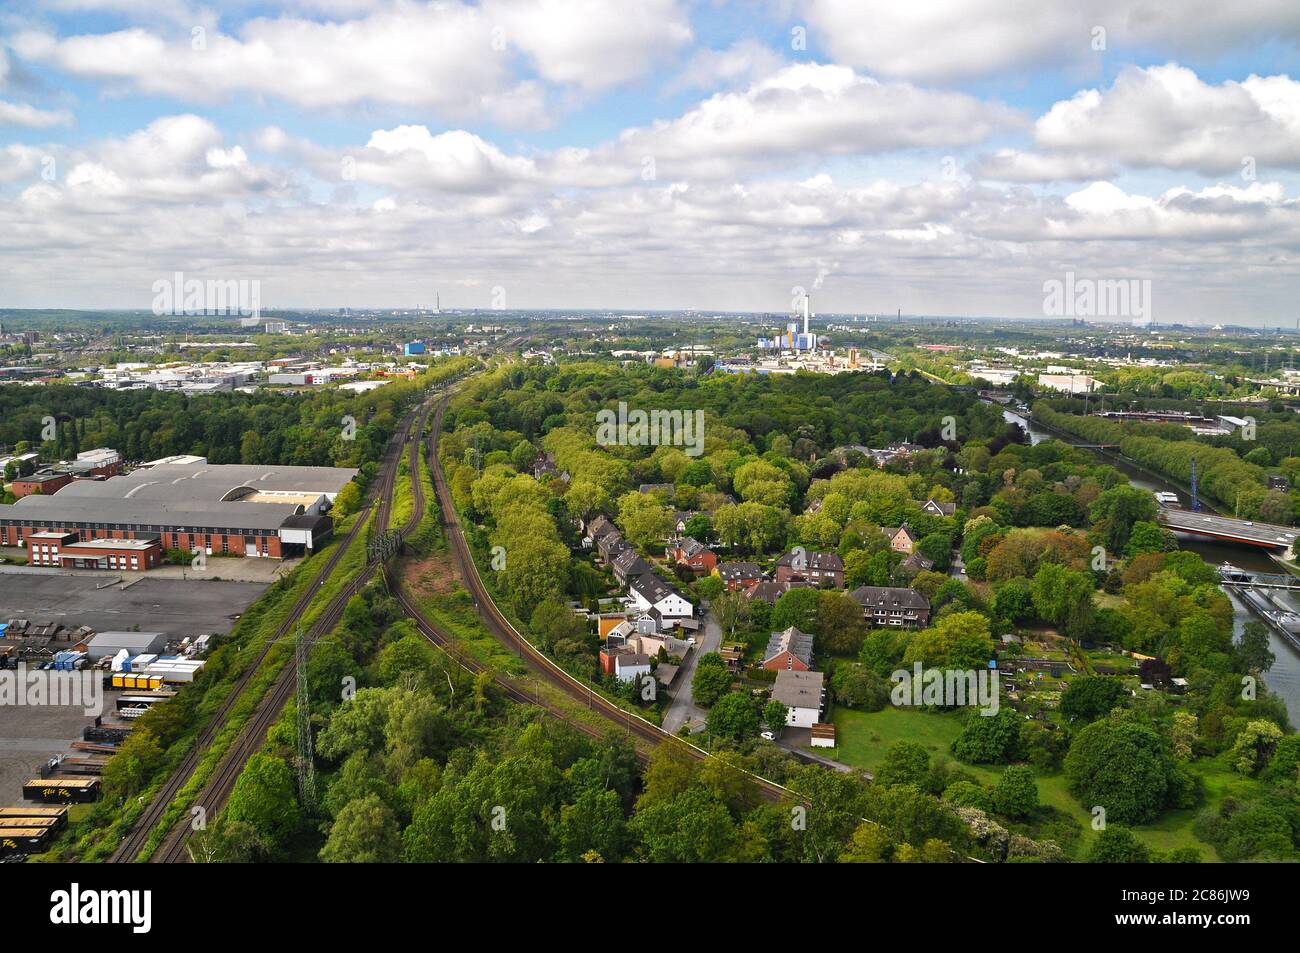 View on the city of Oberhausen, Germany Stock Photo - Alamy